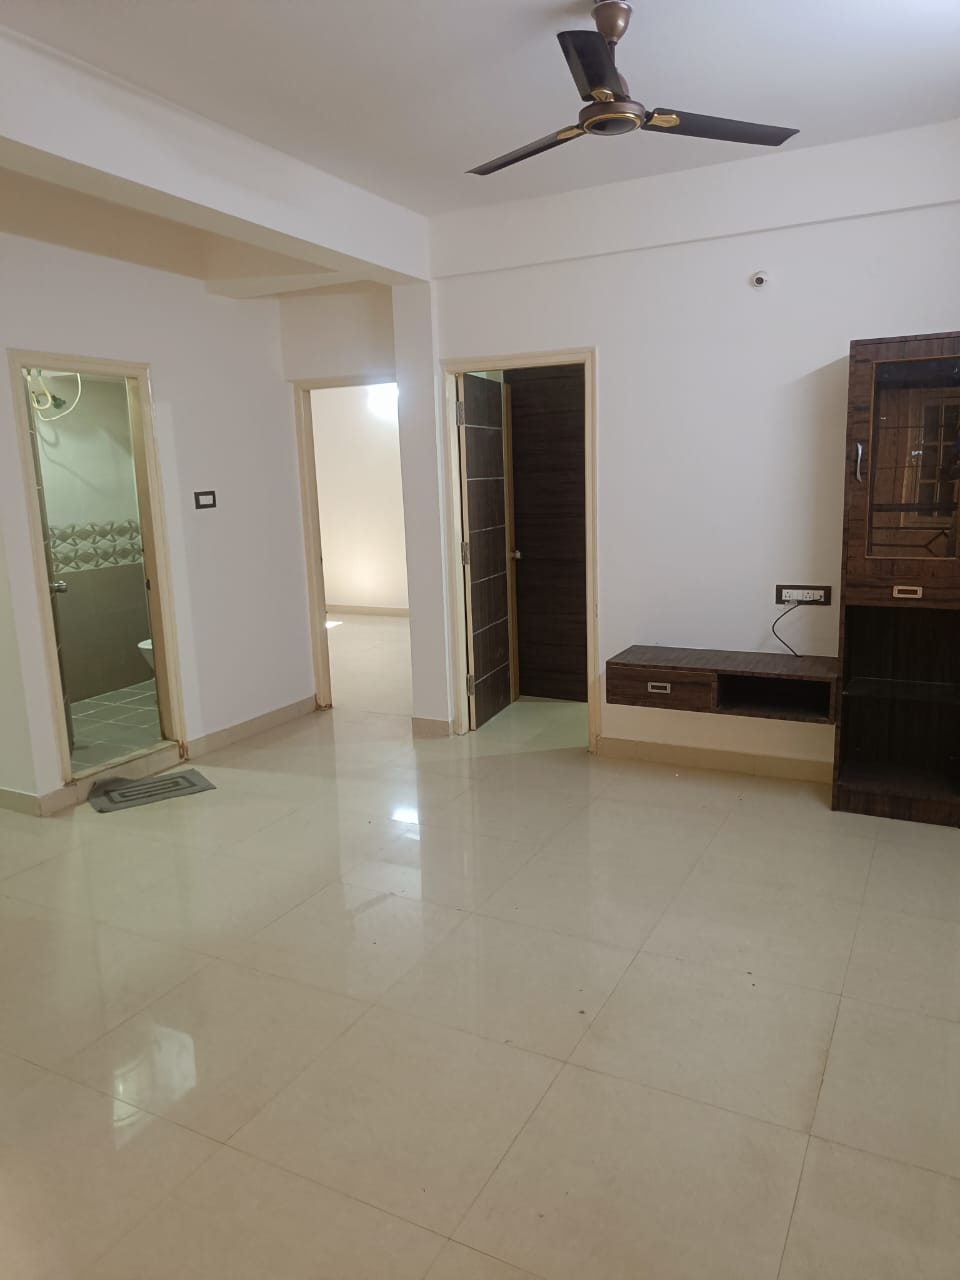 2 BHK Independent House for Lease Only at JAML2 - 4199 in Hoskote